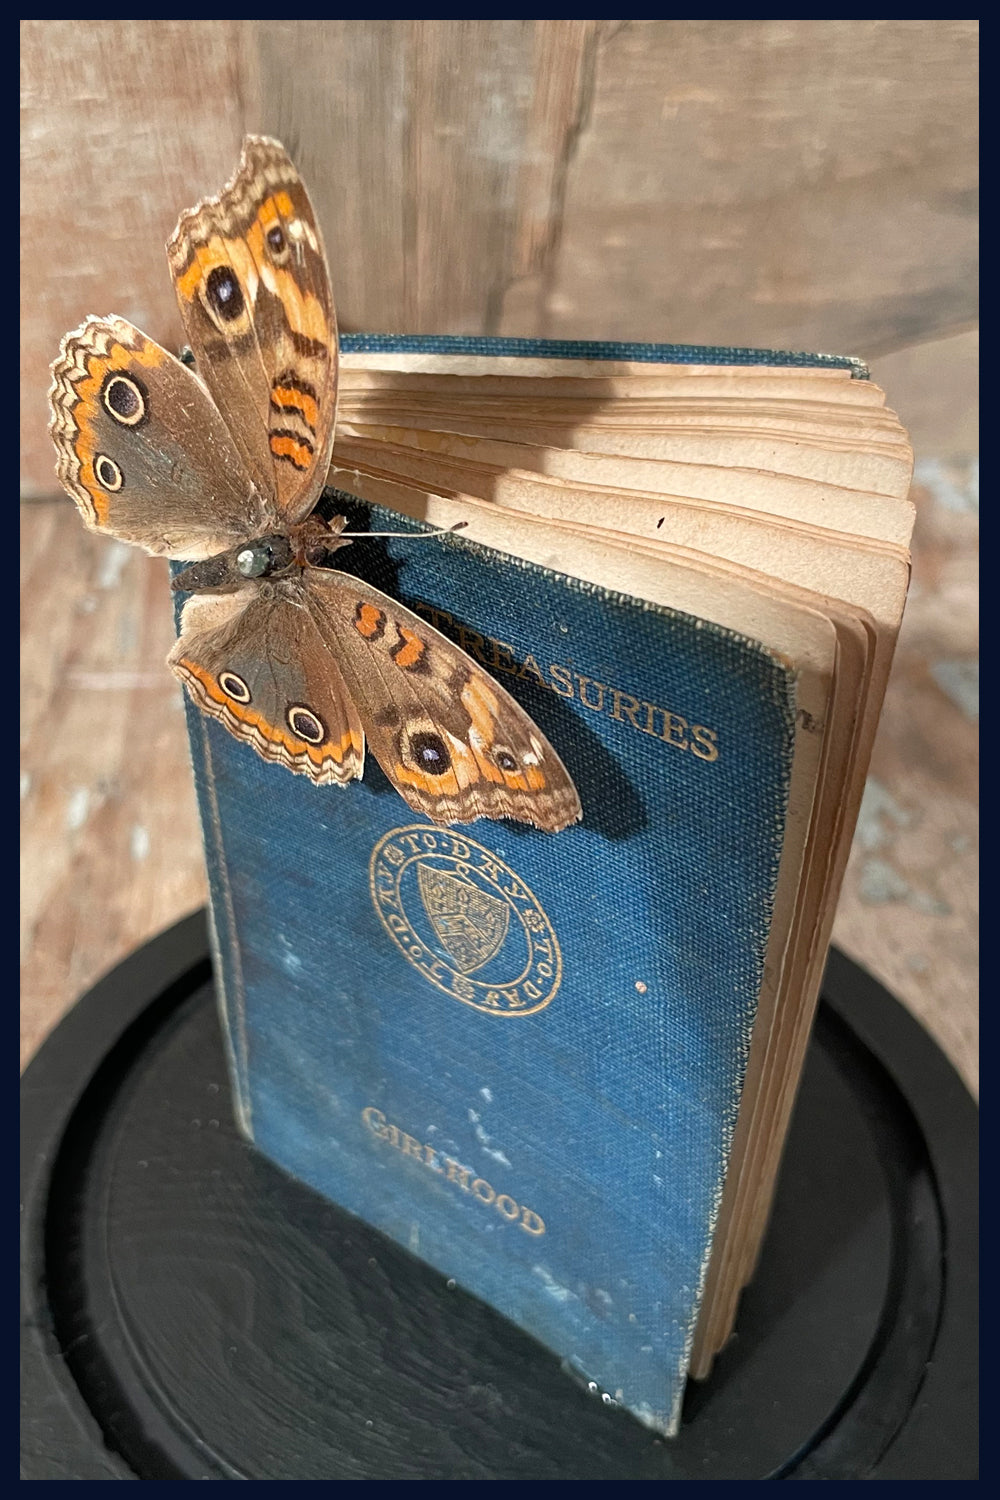 Enigma Variations Collection: Tiny 1907 Ruskin's 'Girlhood' Book with a Real Butterfly in a Display Dome